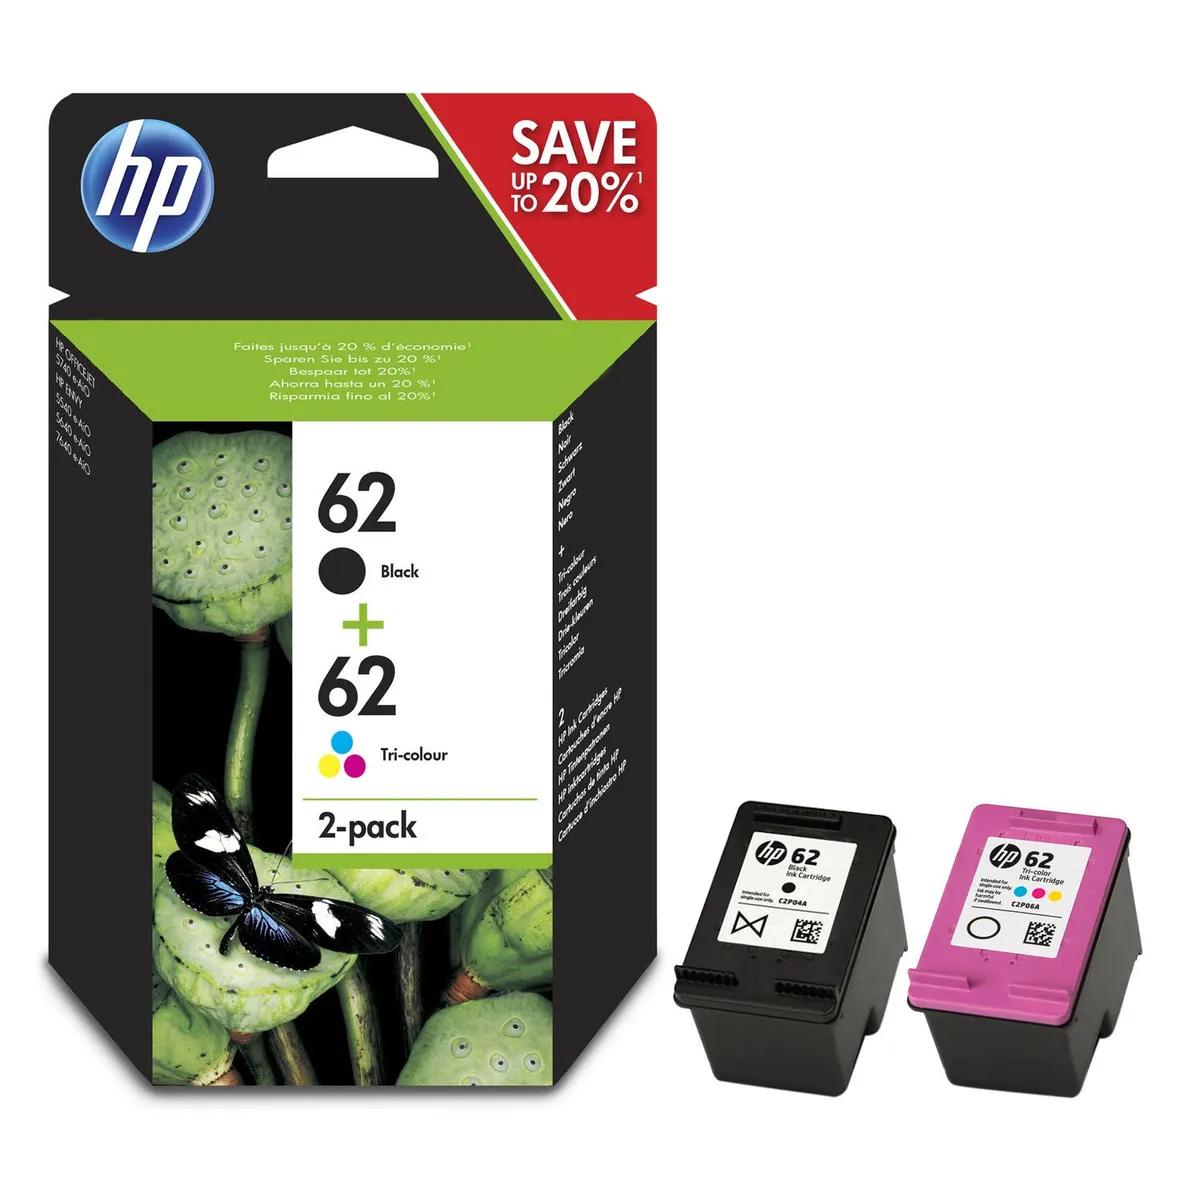 Hp officejet 250 ink cartridges: hp 62 & hp 62xl for optimal performance